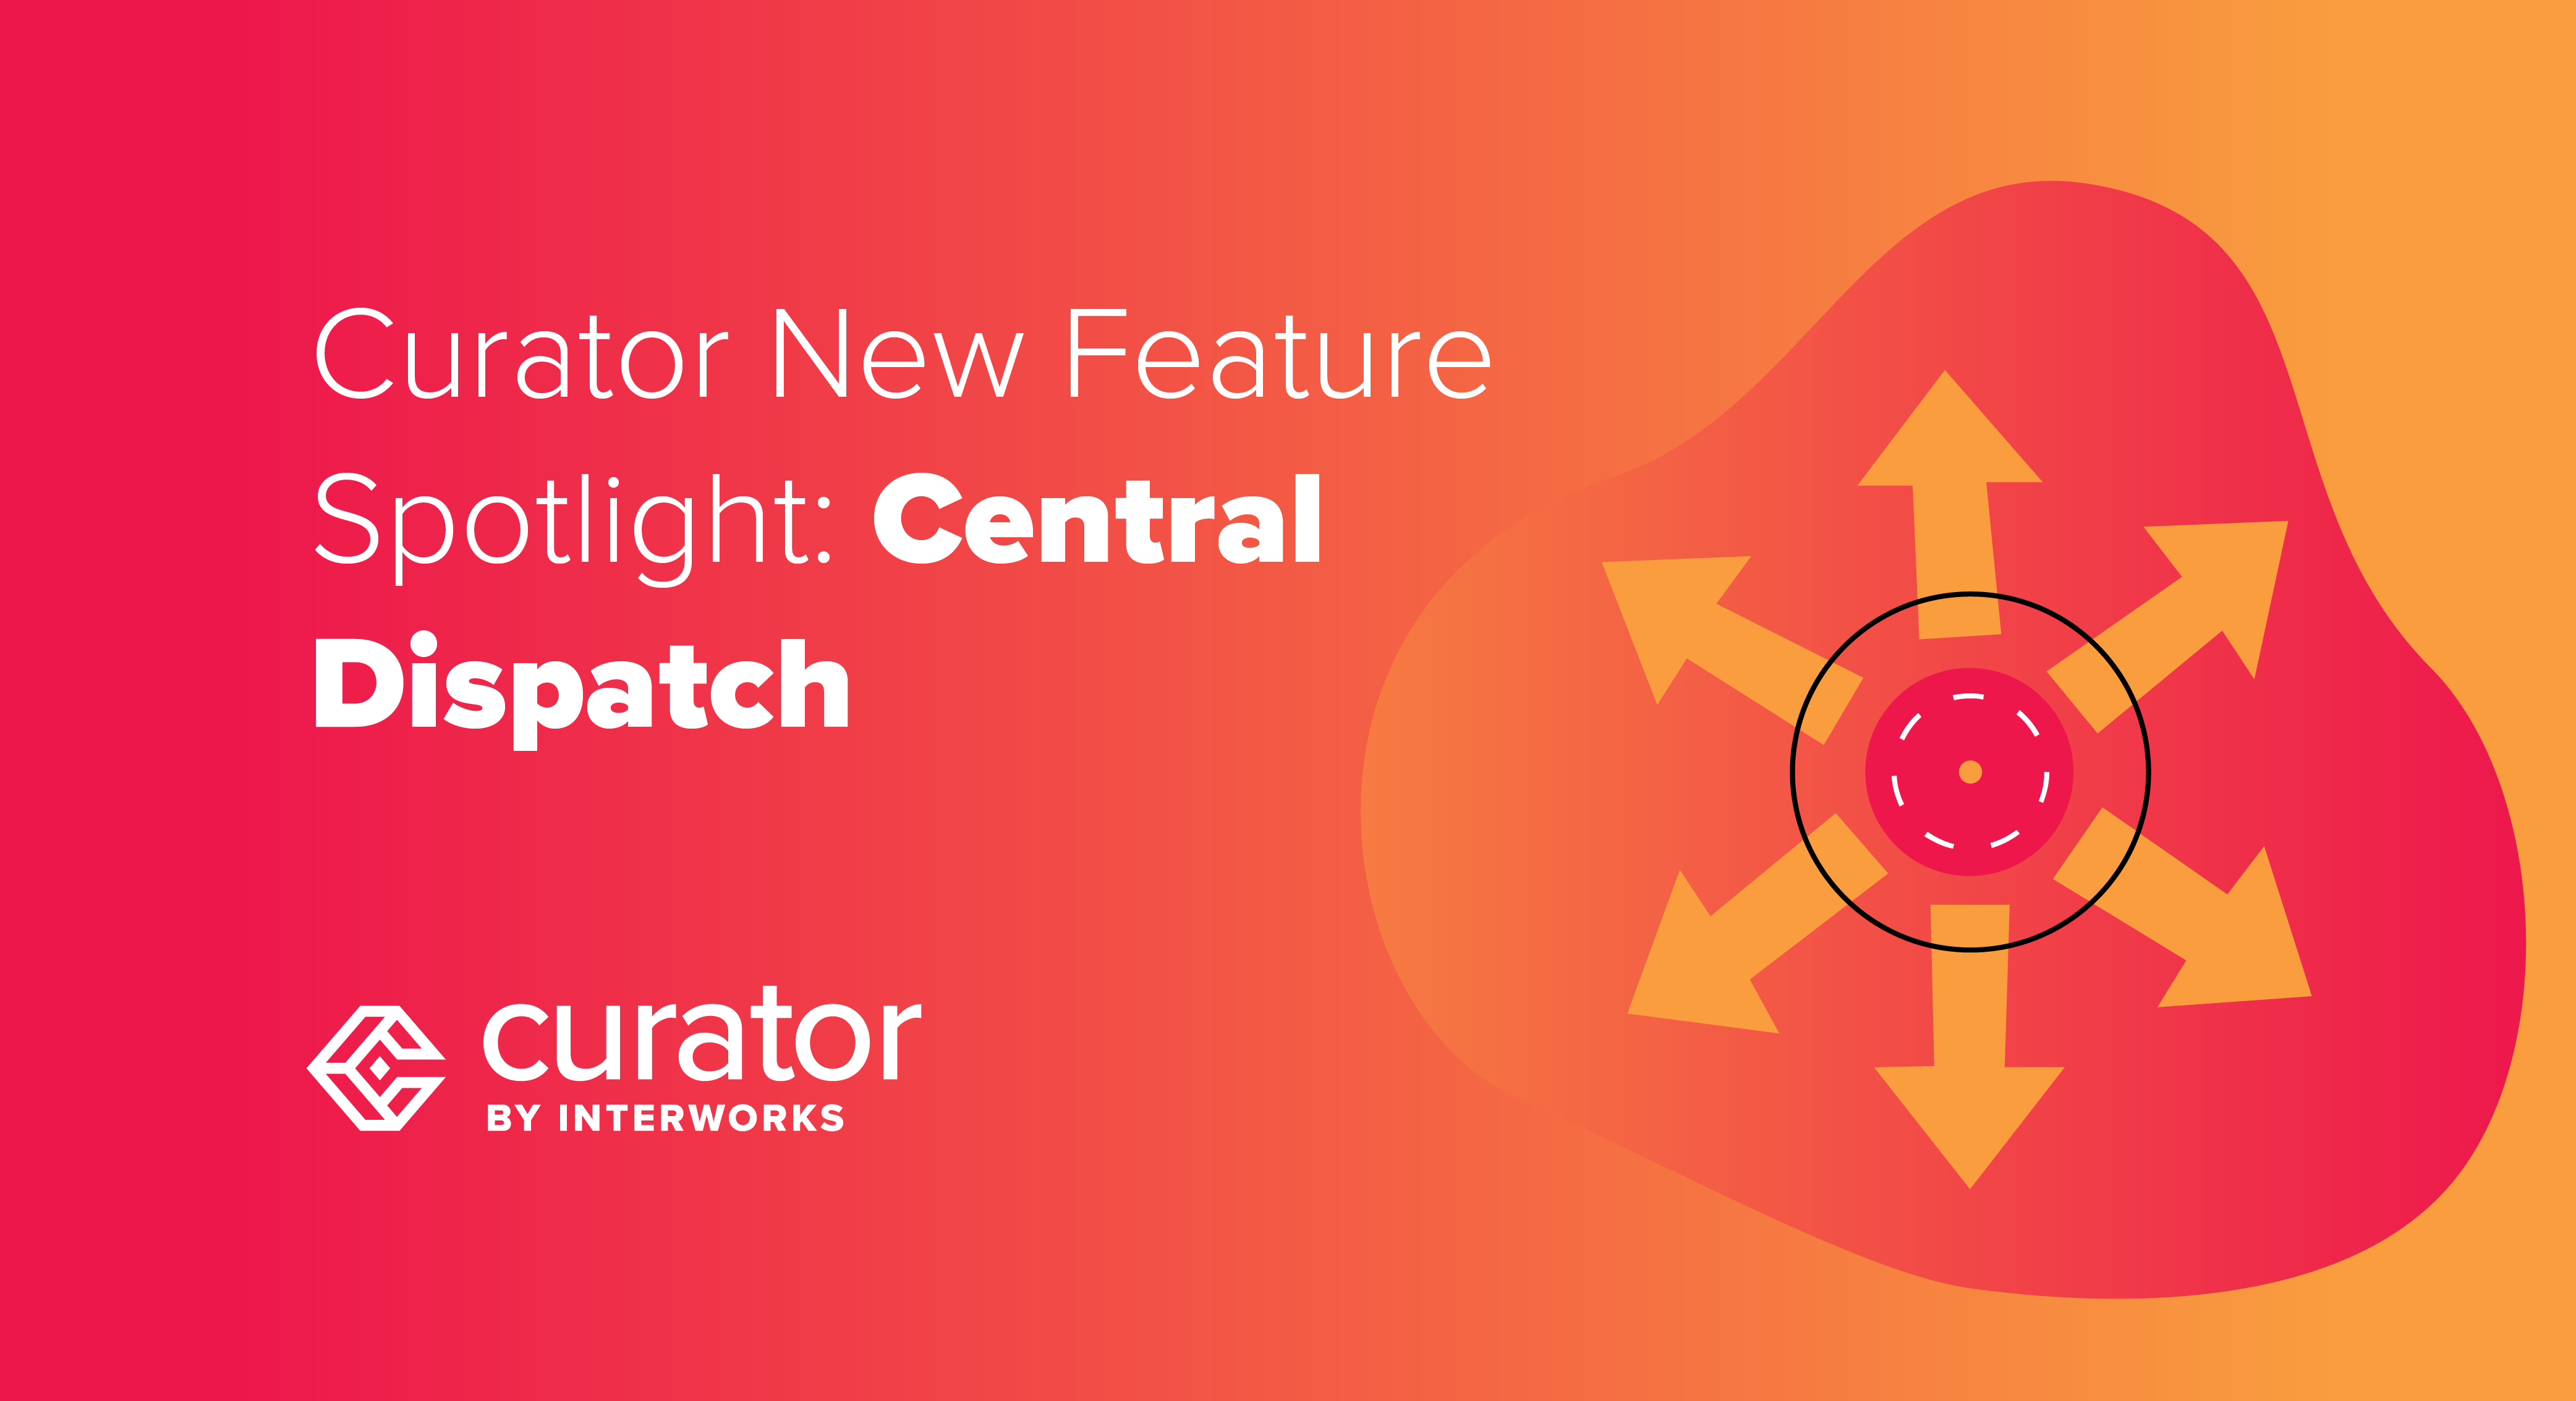 page thumbnail: Curator New Feature Spotlight: Central Dispatch